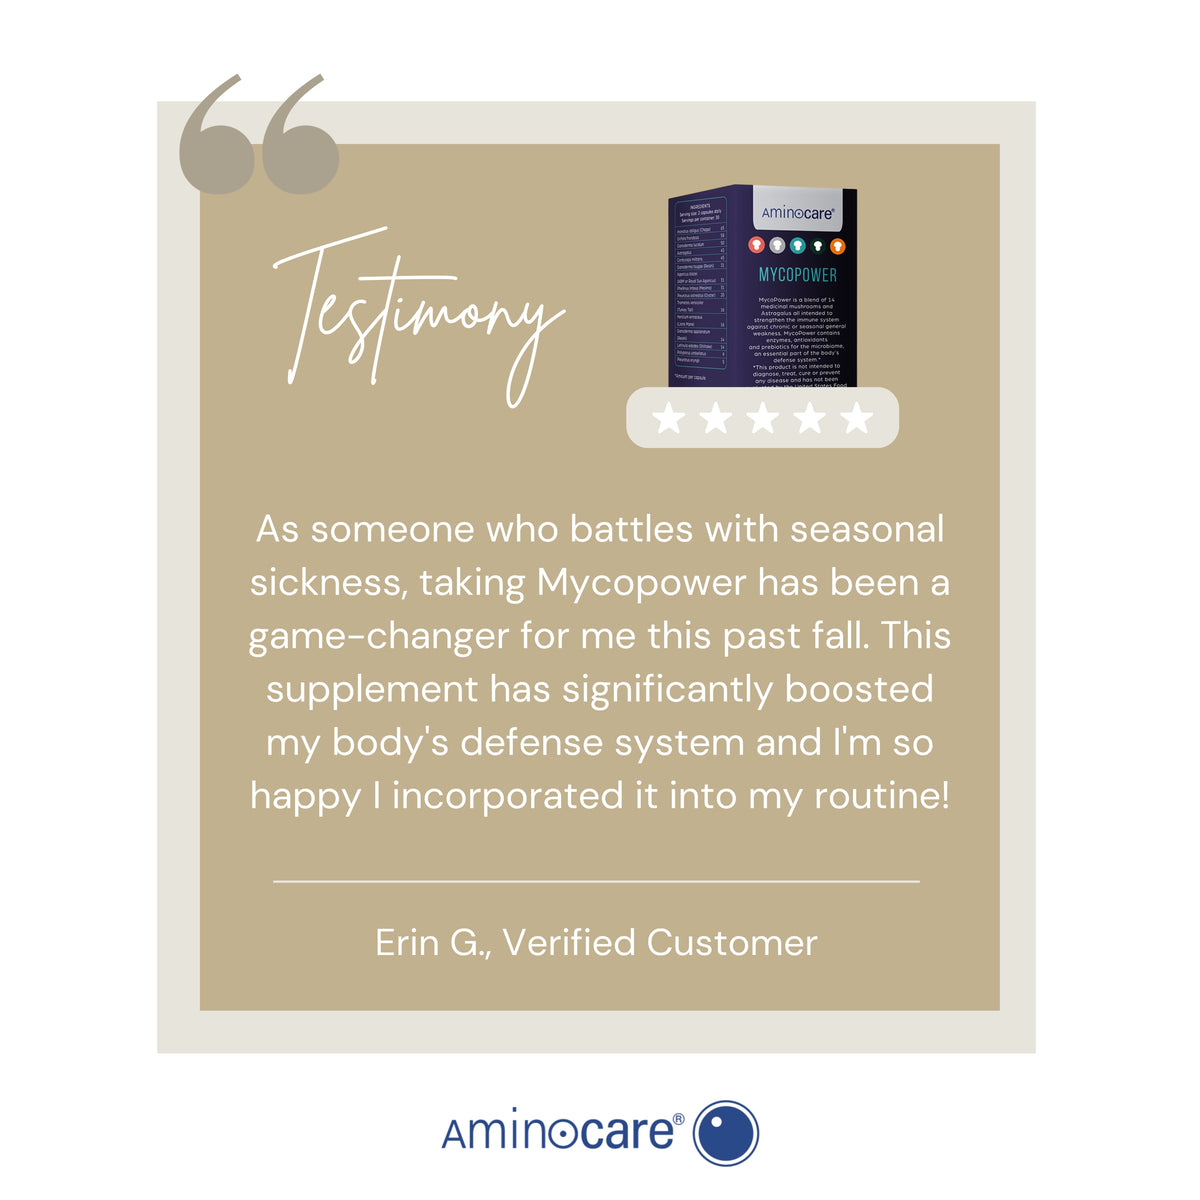 Customer Approved Testimonial of Aminocare® Mycopower